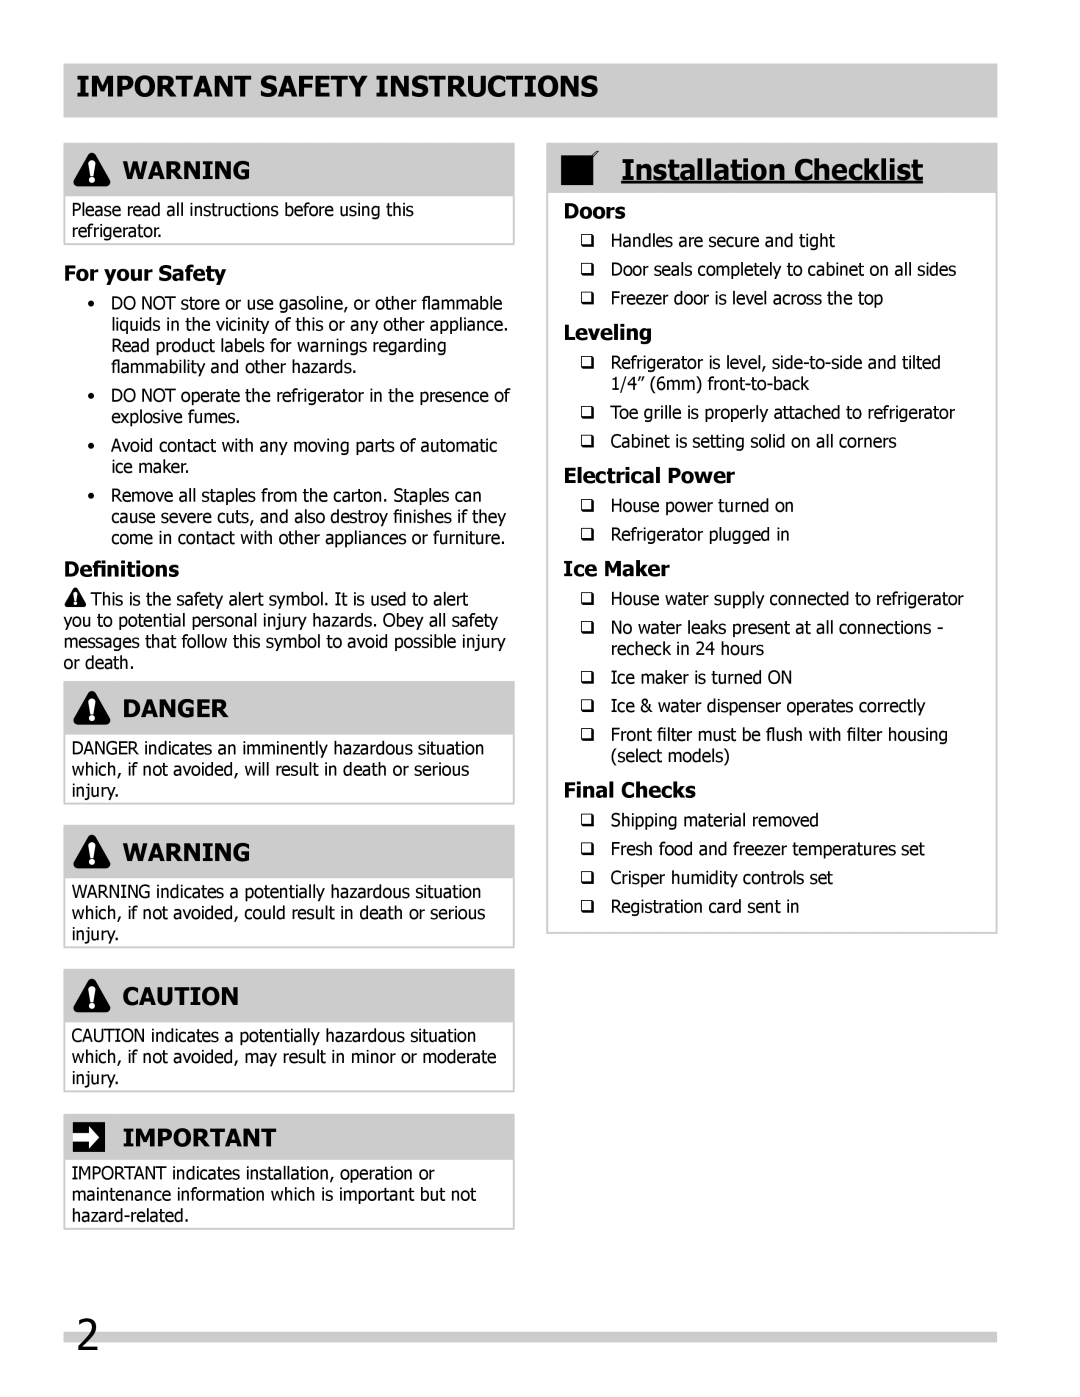 Frigidaire 242008000 Important Safety Instructions, Installation Checklist, Danger, For your Safety, Definitions, Doors 